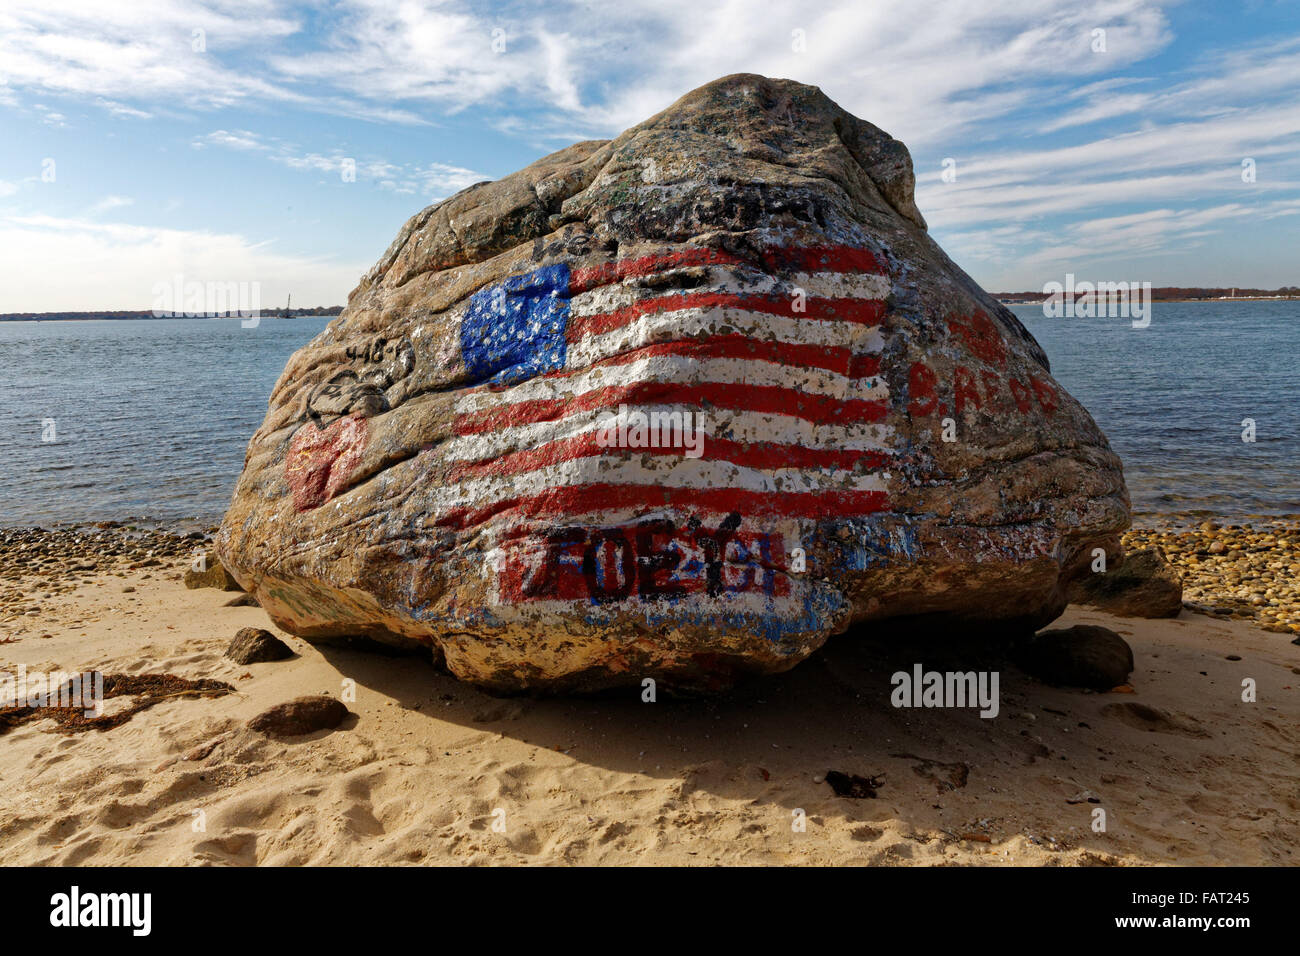 The American flag painted on a rock as a makeshift memorial to the 9-11 attacks, on Shelter island, New York. Stock Photo